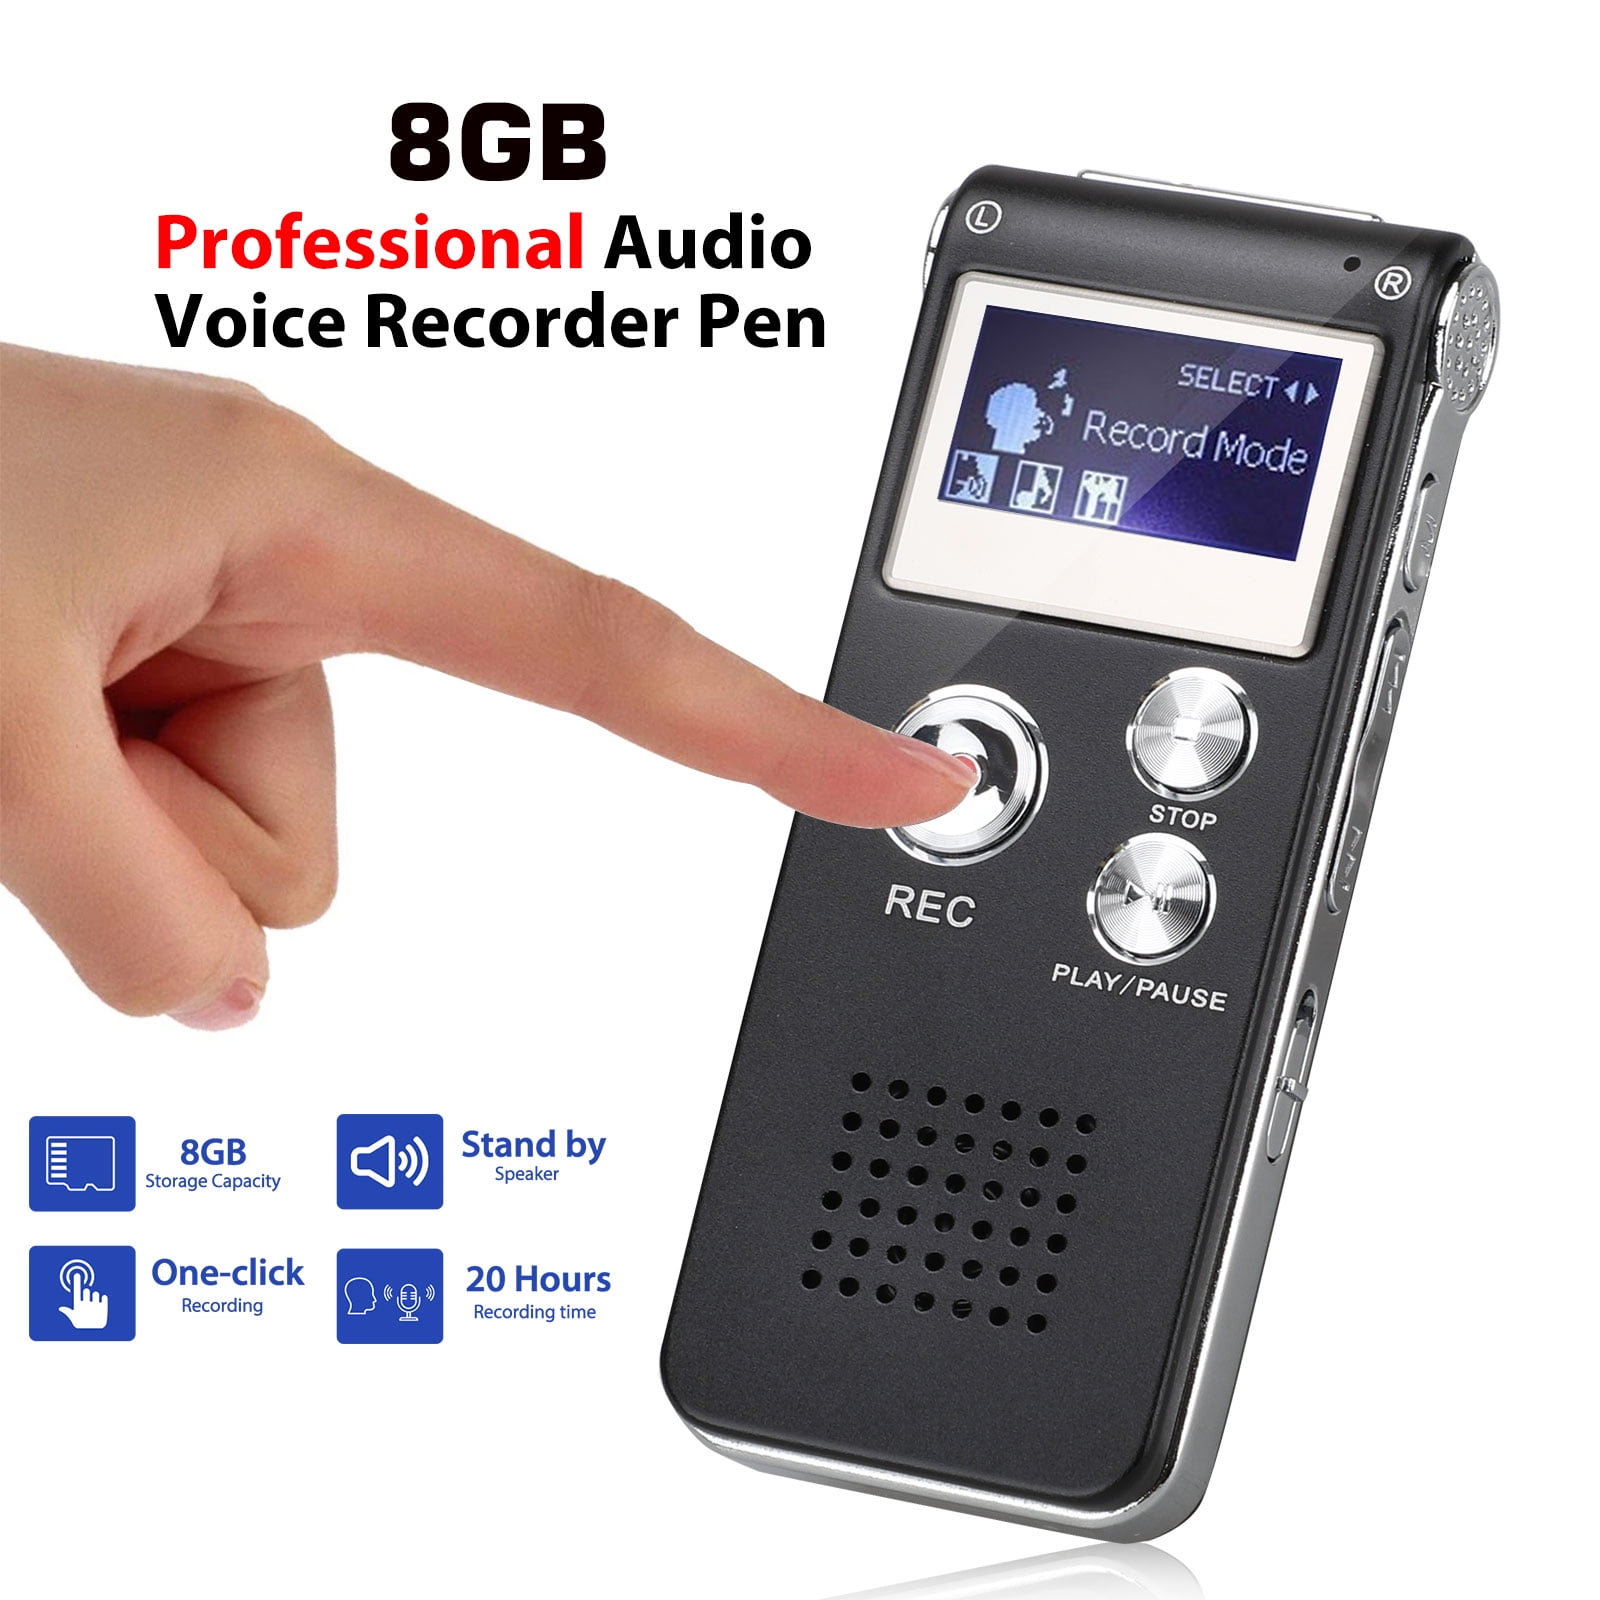 SpyX Micro Voice Disguise-Voice Recording Spy Toy-Record Your Voice & Play Back 